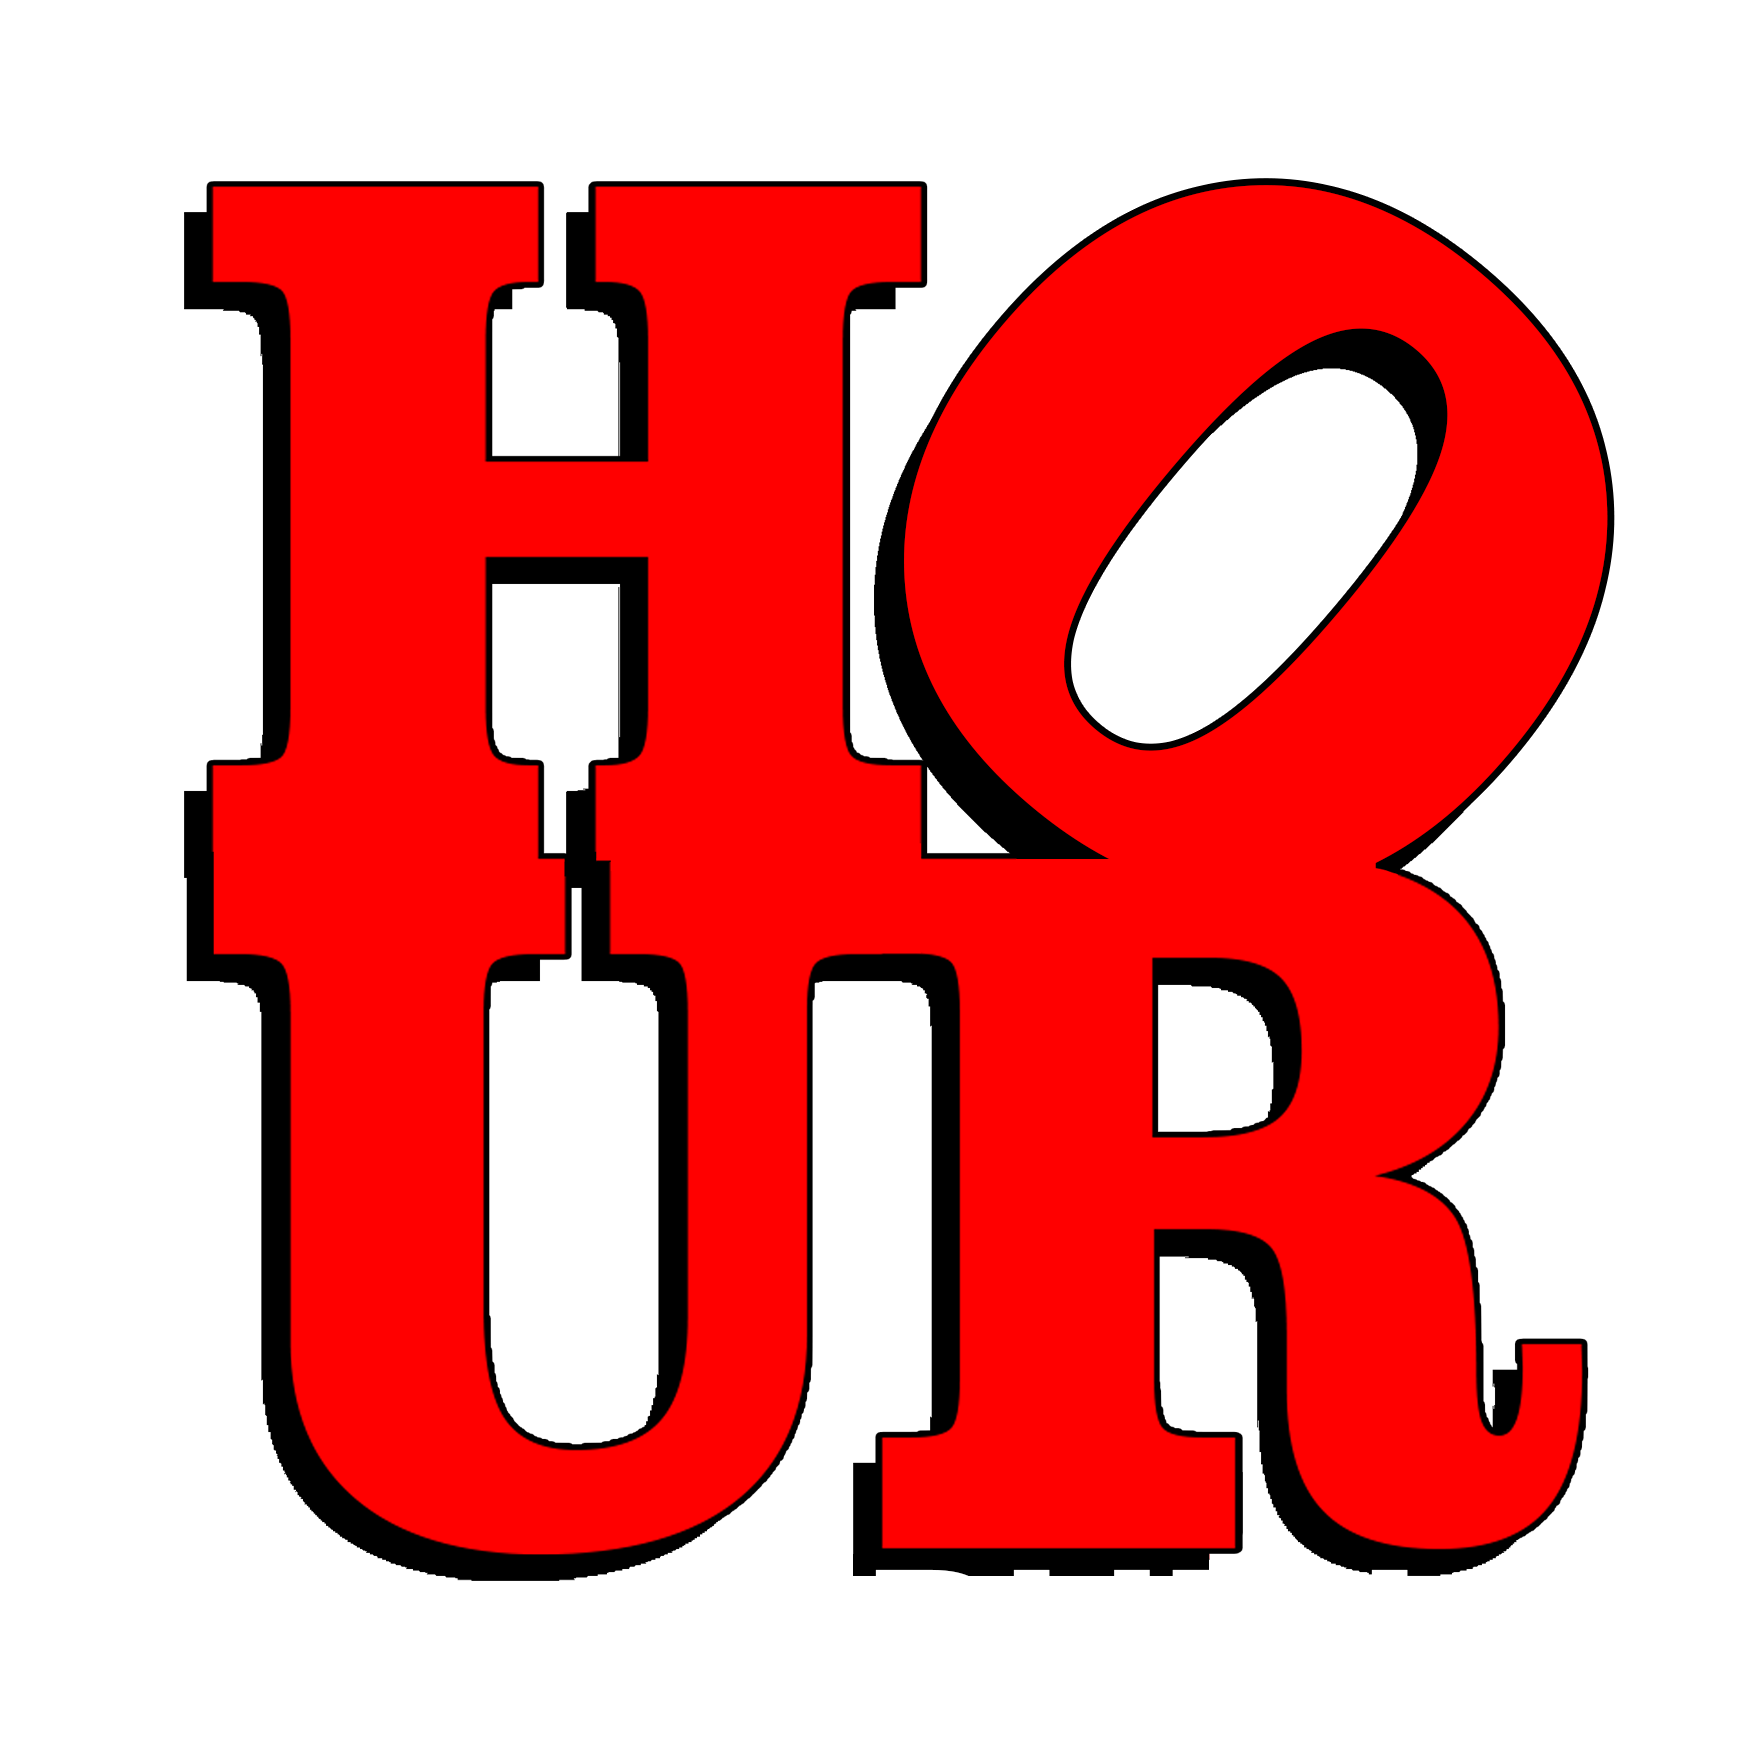 Happy Hour Philly